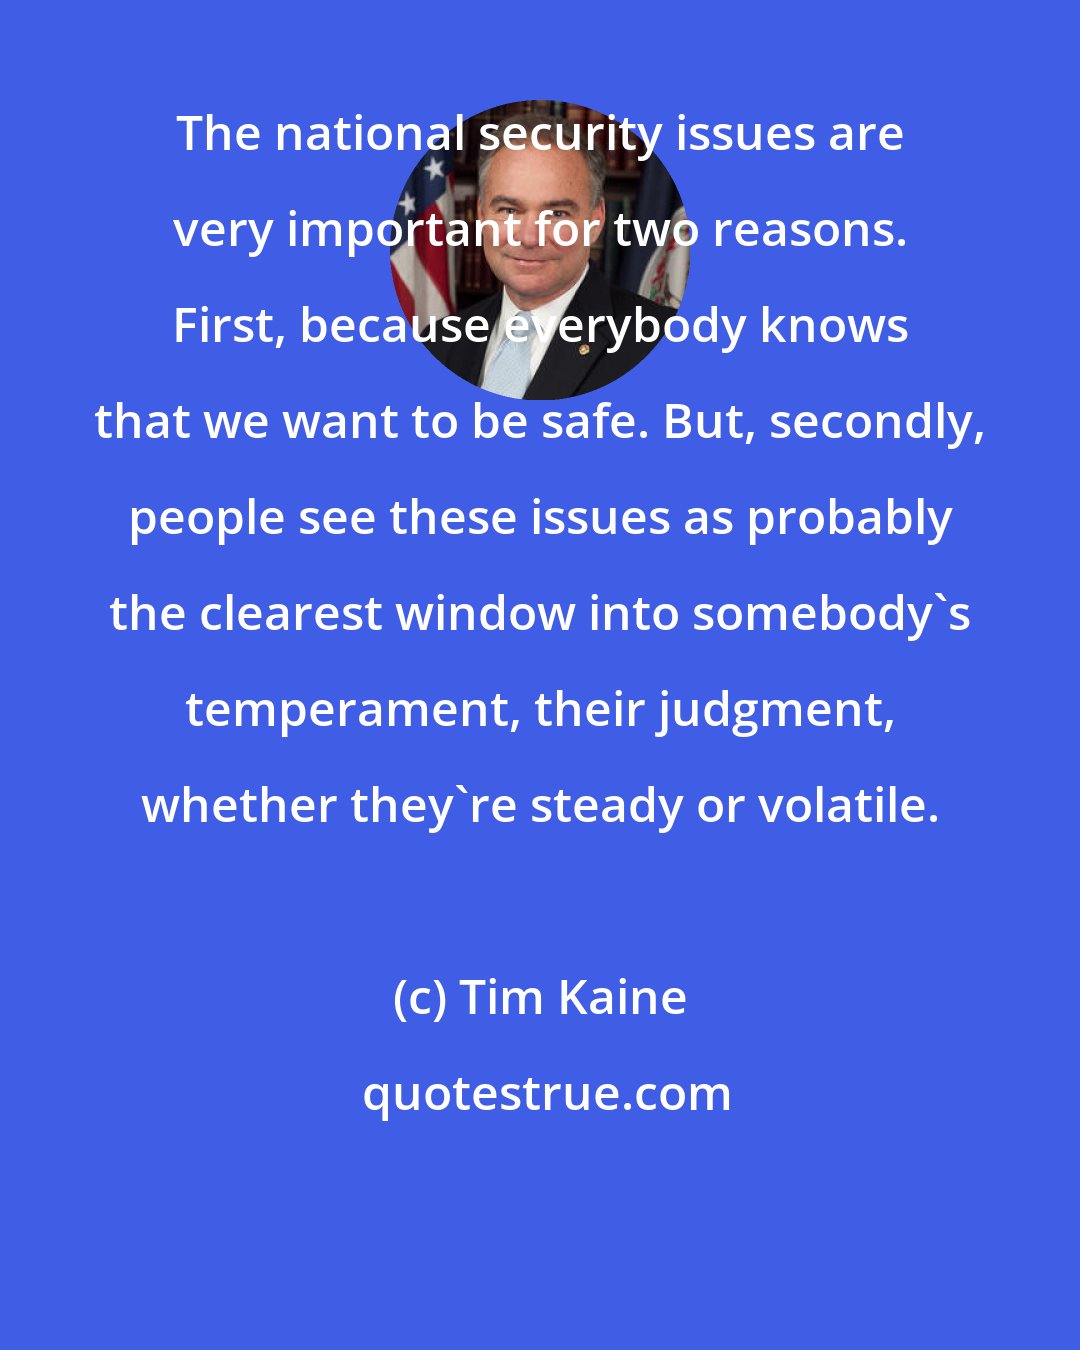 Tim Kaine: The national security issues are very important for two reasons. First, because everybody knows that we want to be safe. But, secondly, people see these issues as probably the clearest window into somebody's temperament, their judgment, whether they're steady or volatile.